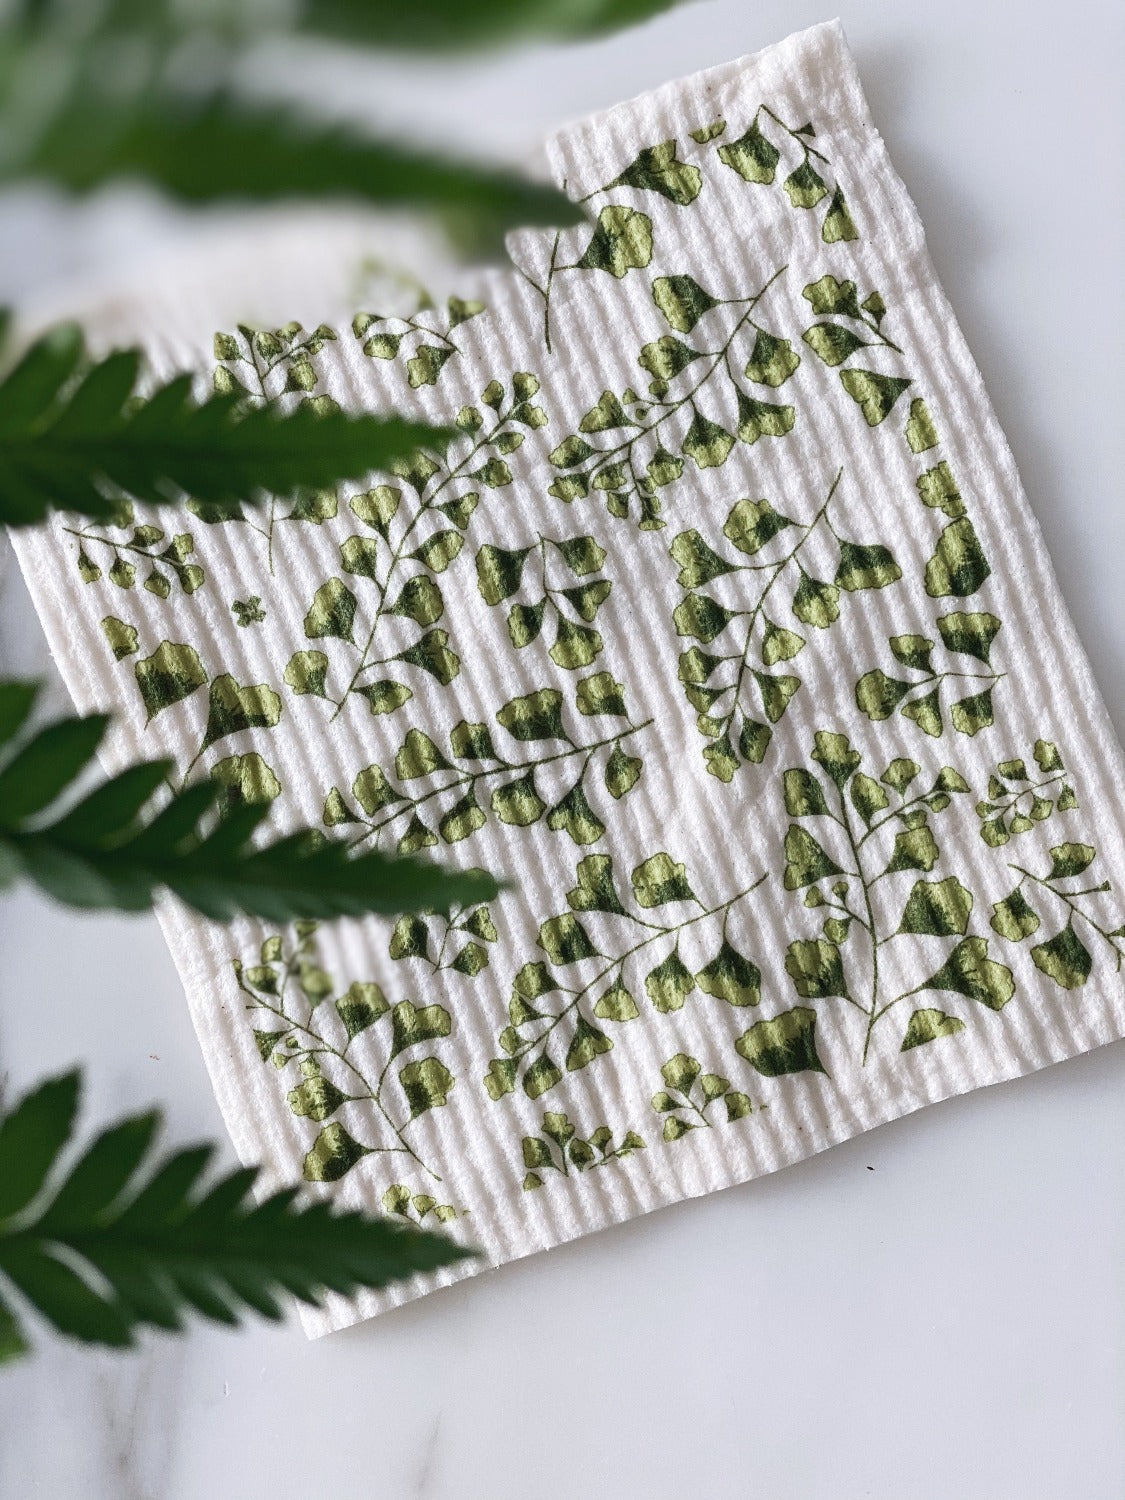 Product image of Fern Sponge Cloth on a white marble surface. In the blurry foreground there is a green plant. In the focused background there is the wet Fern Sponge cloth. 